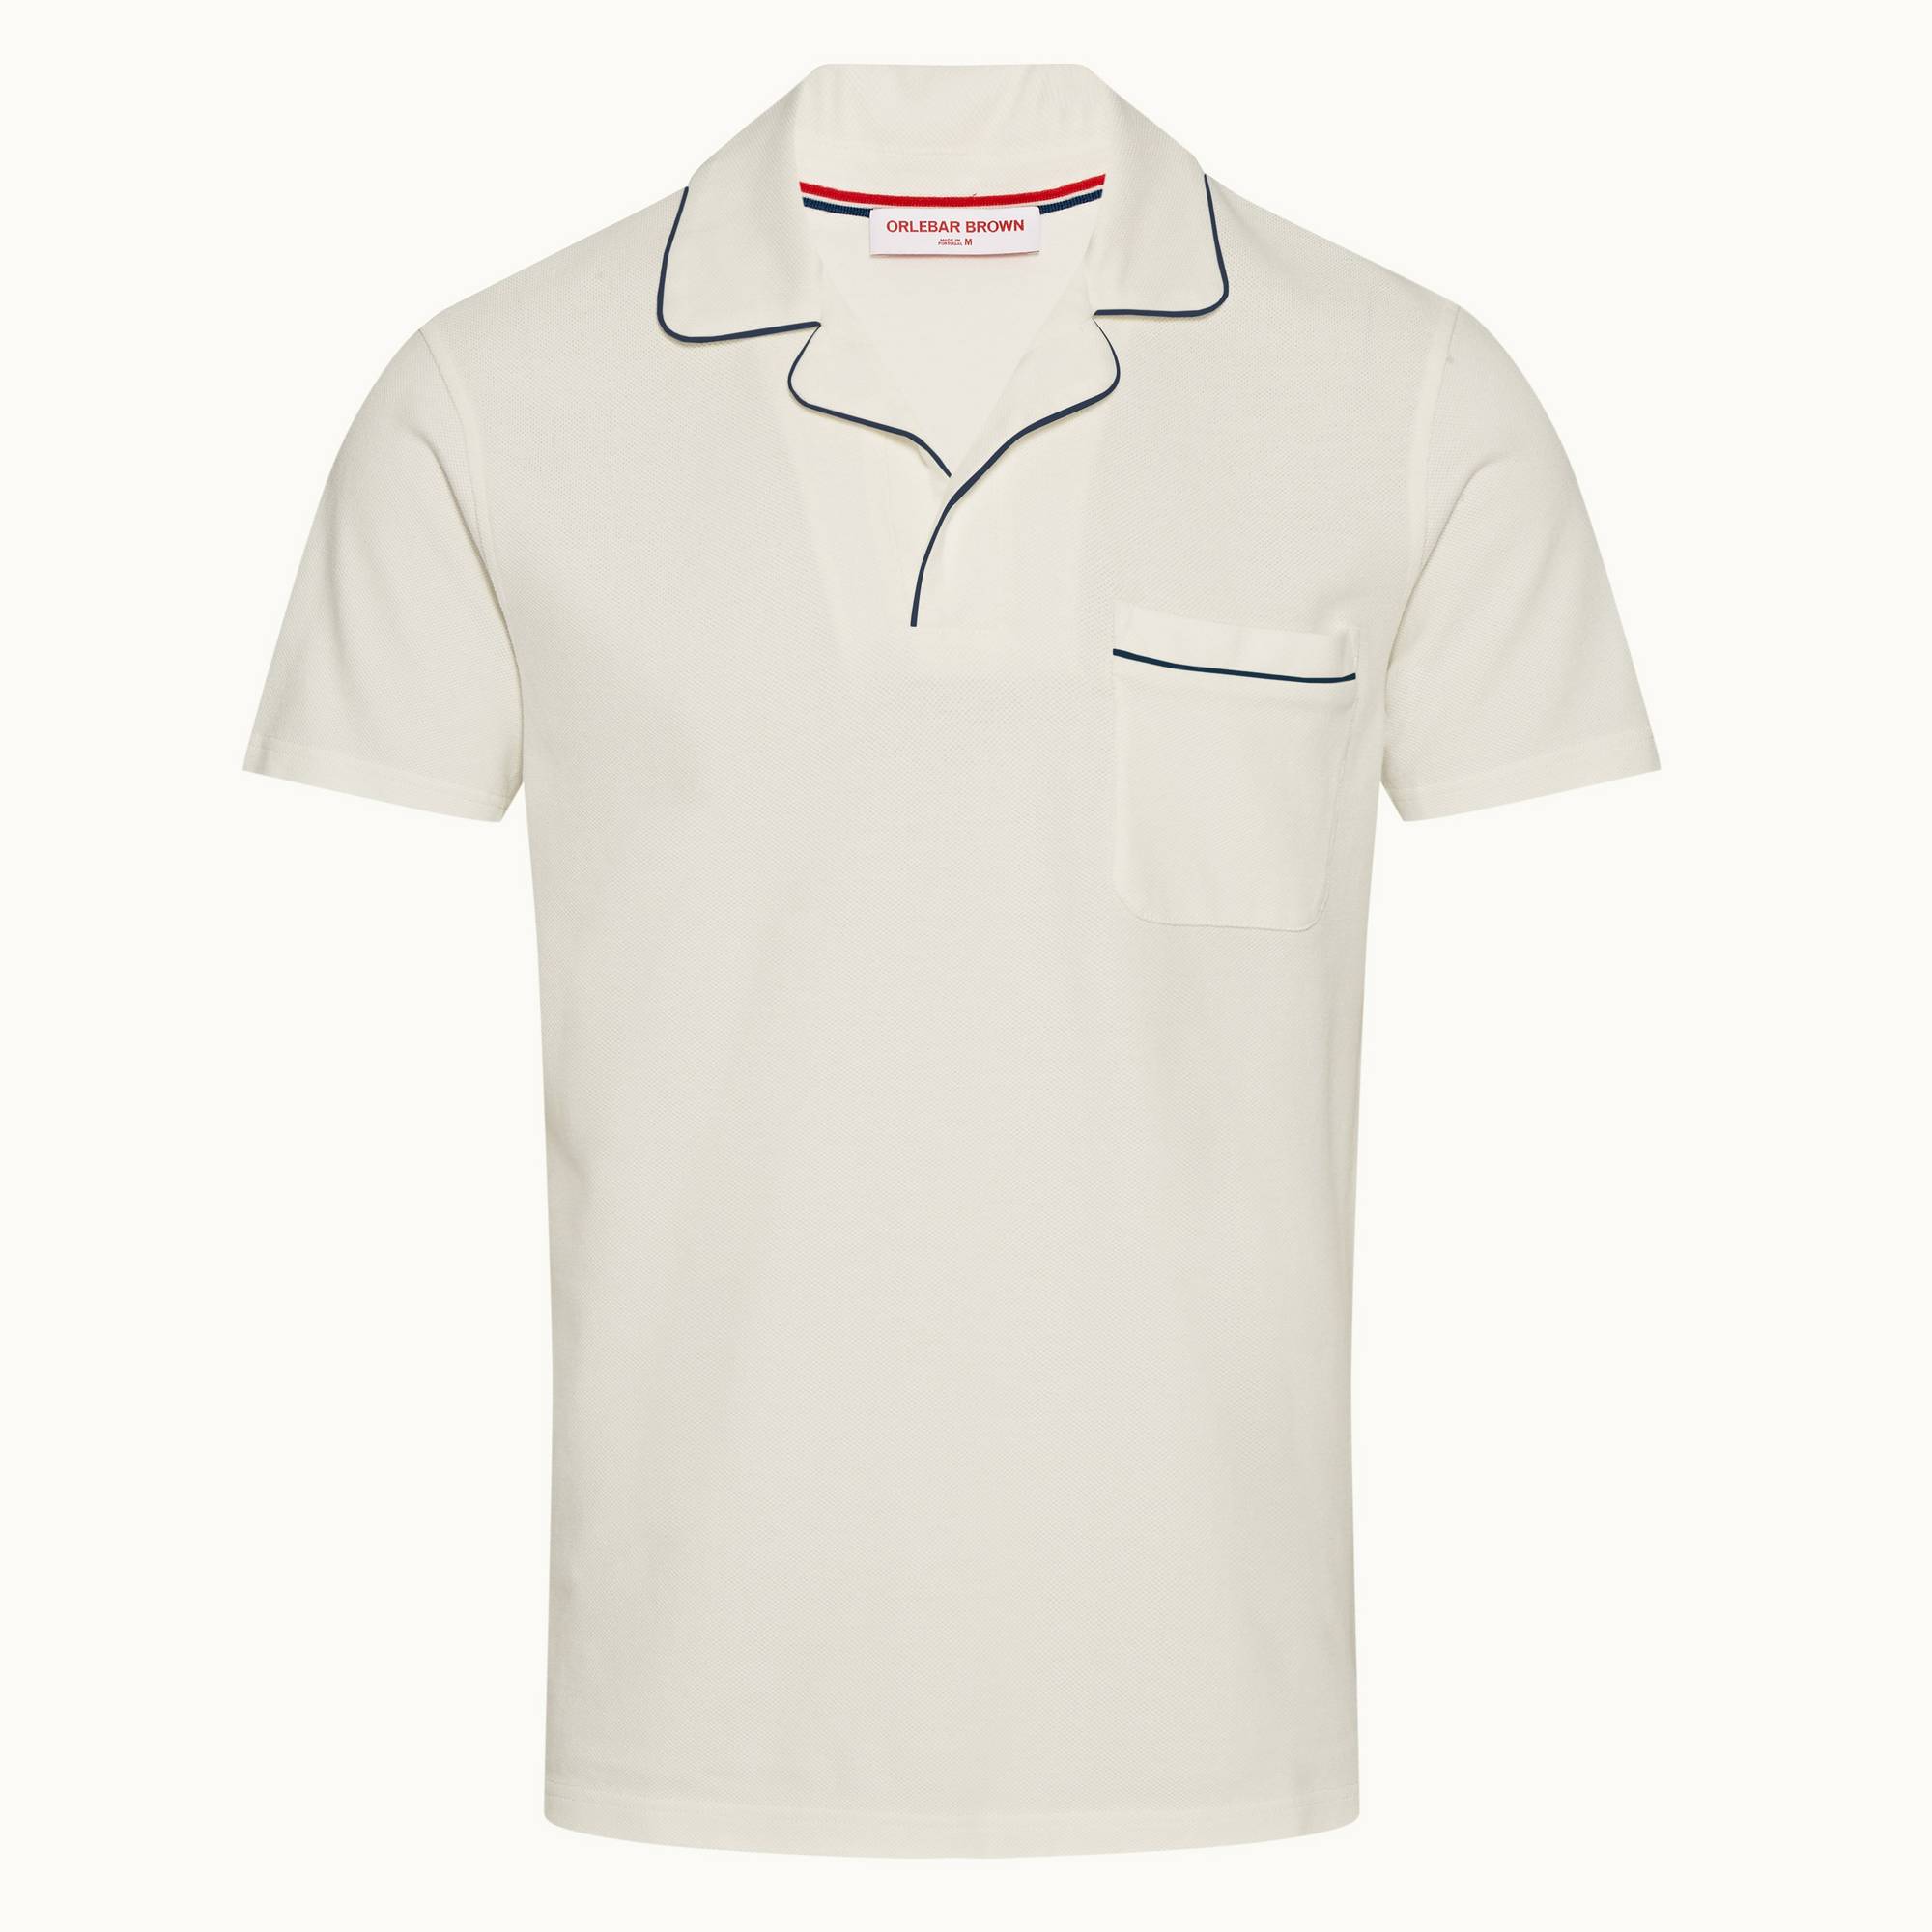 Donald Piping - Mens White Sand Classic Fit Contrast Piping Collar Polo Shirt